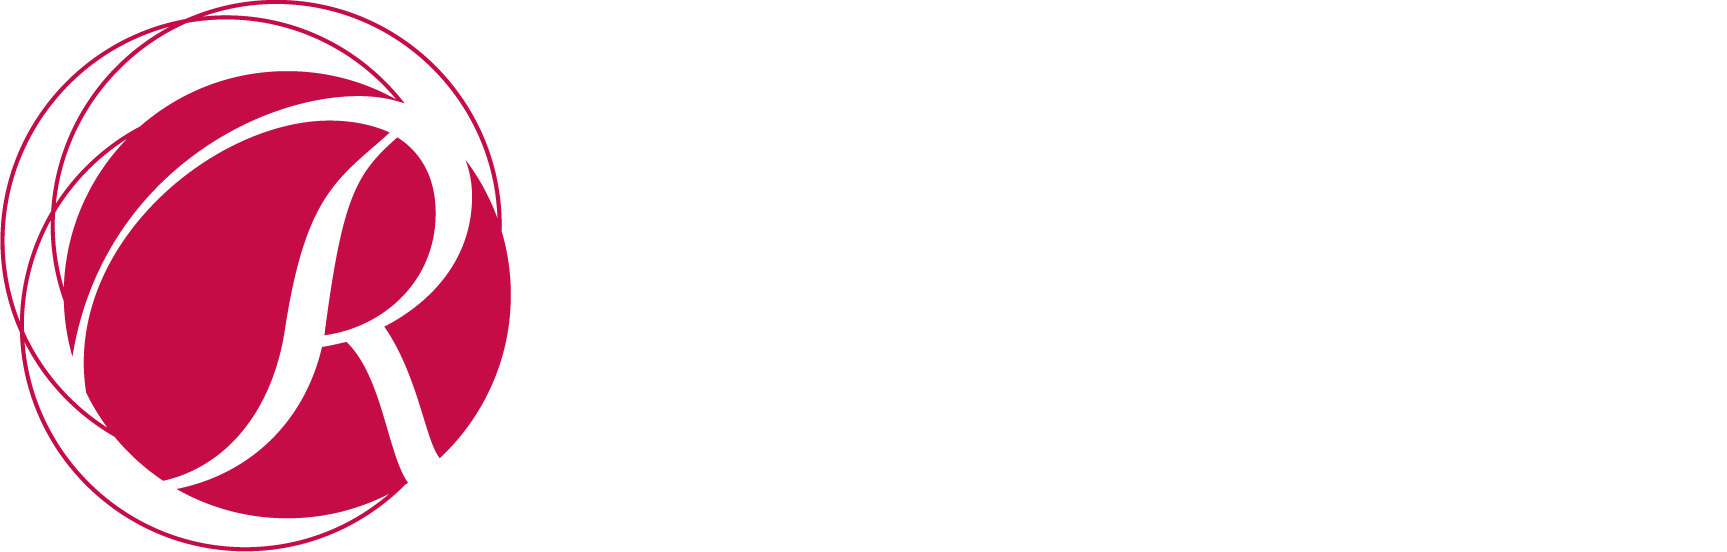 Russell's Logo